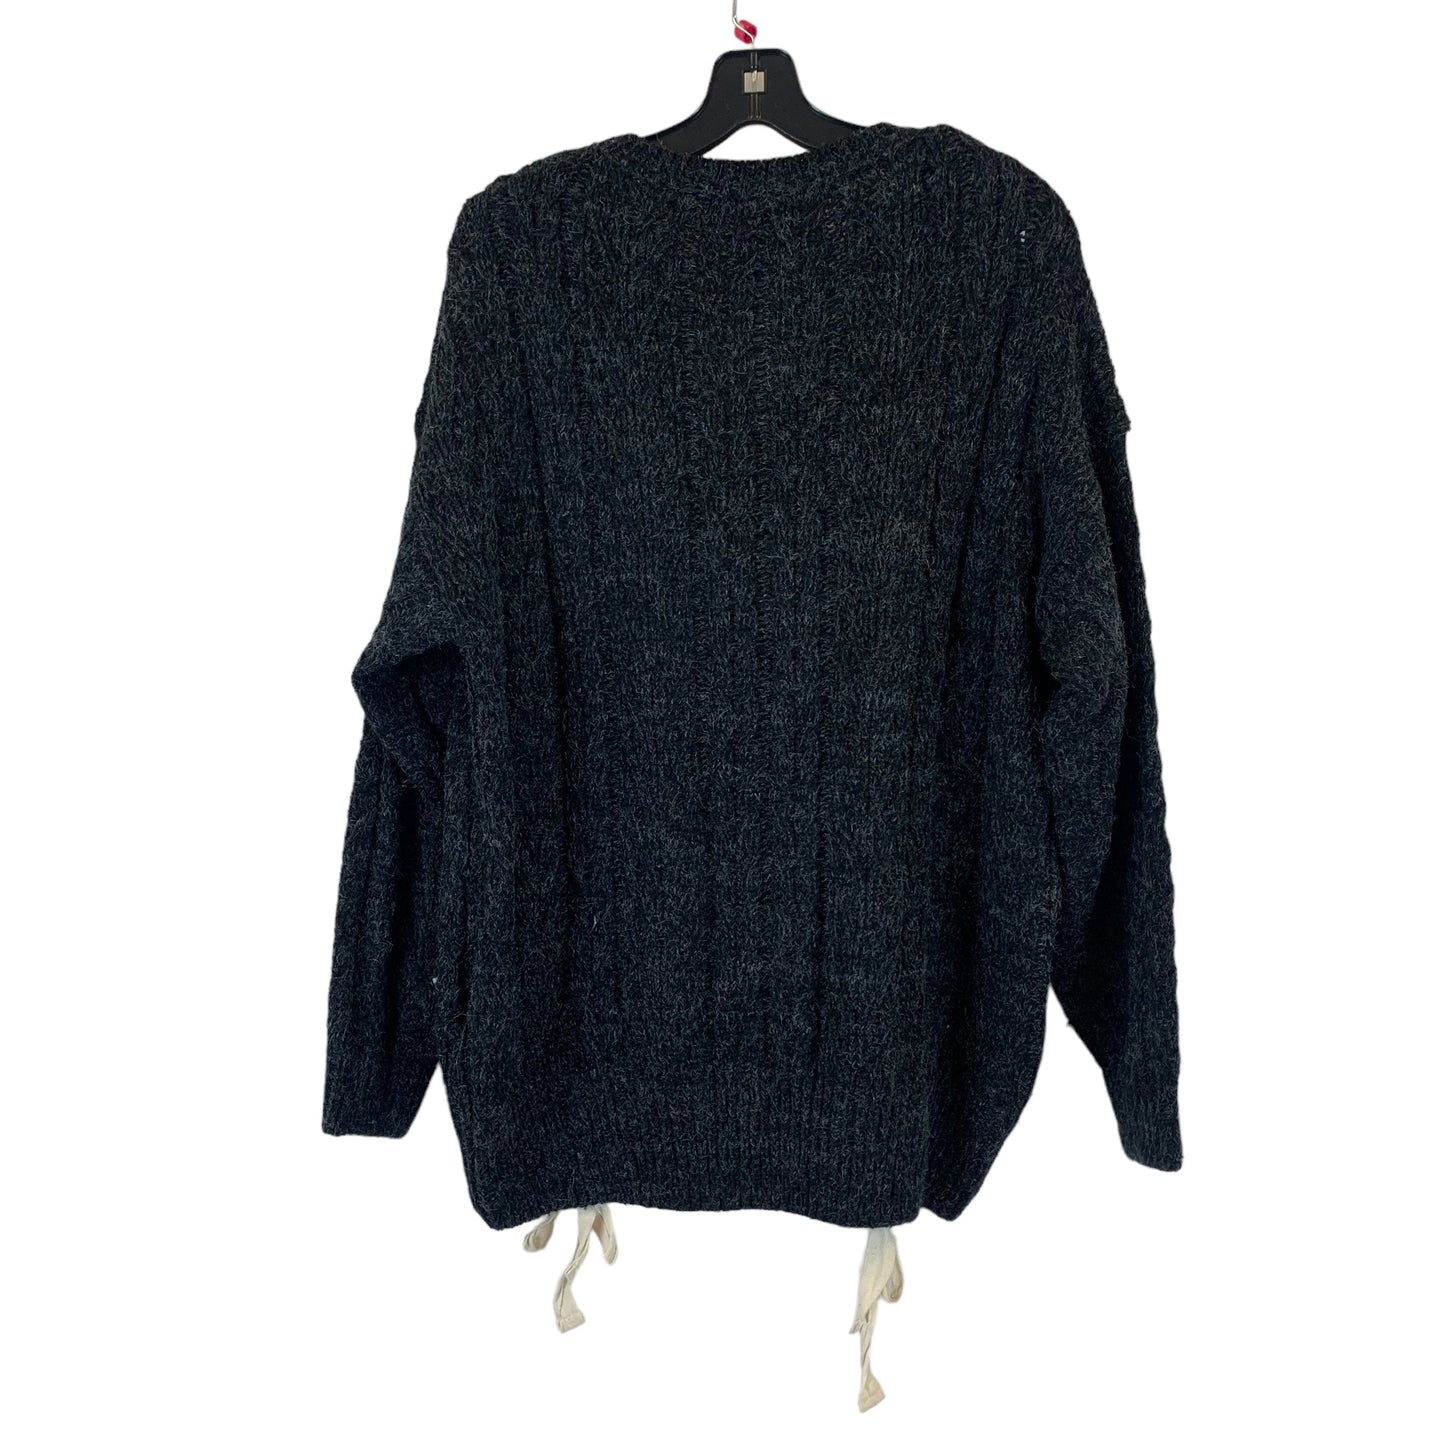 Sweater By Entro  Size: L